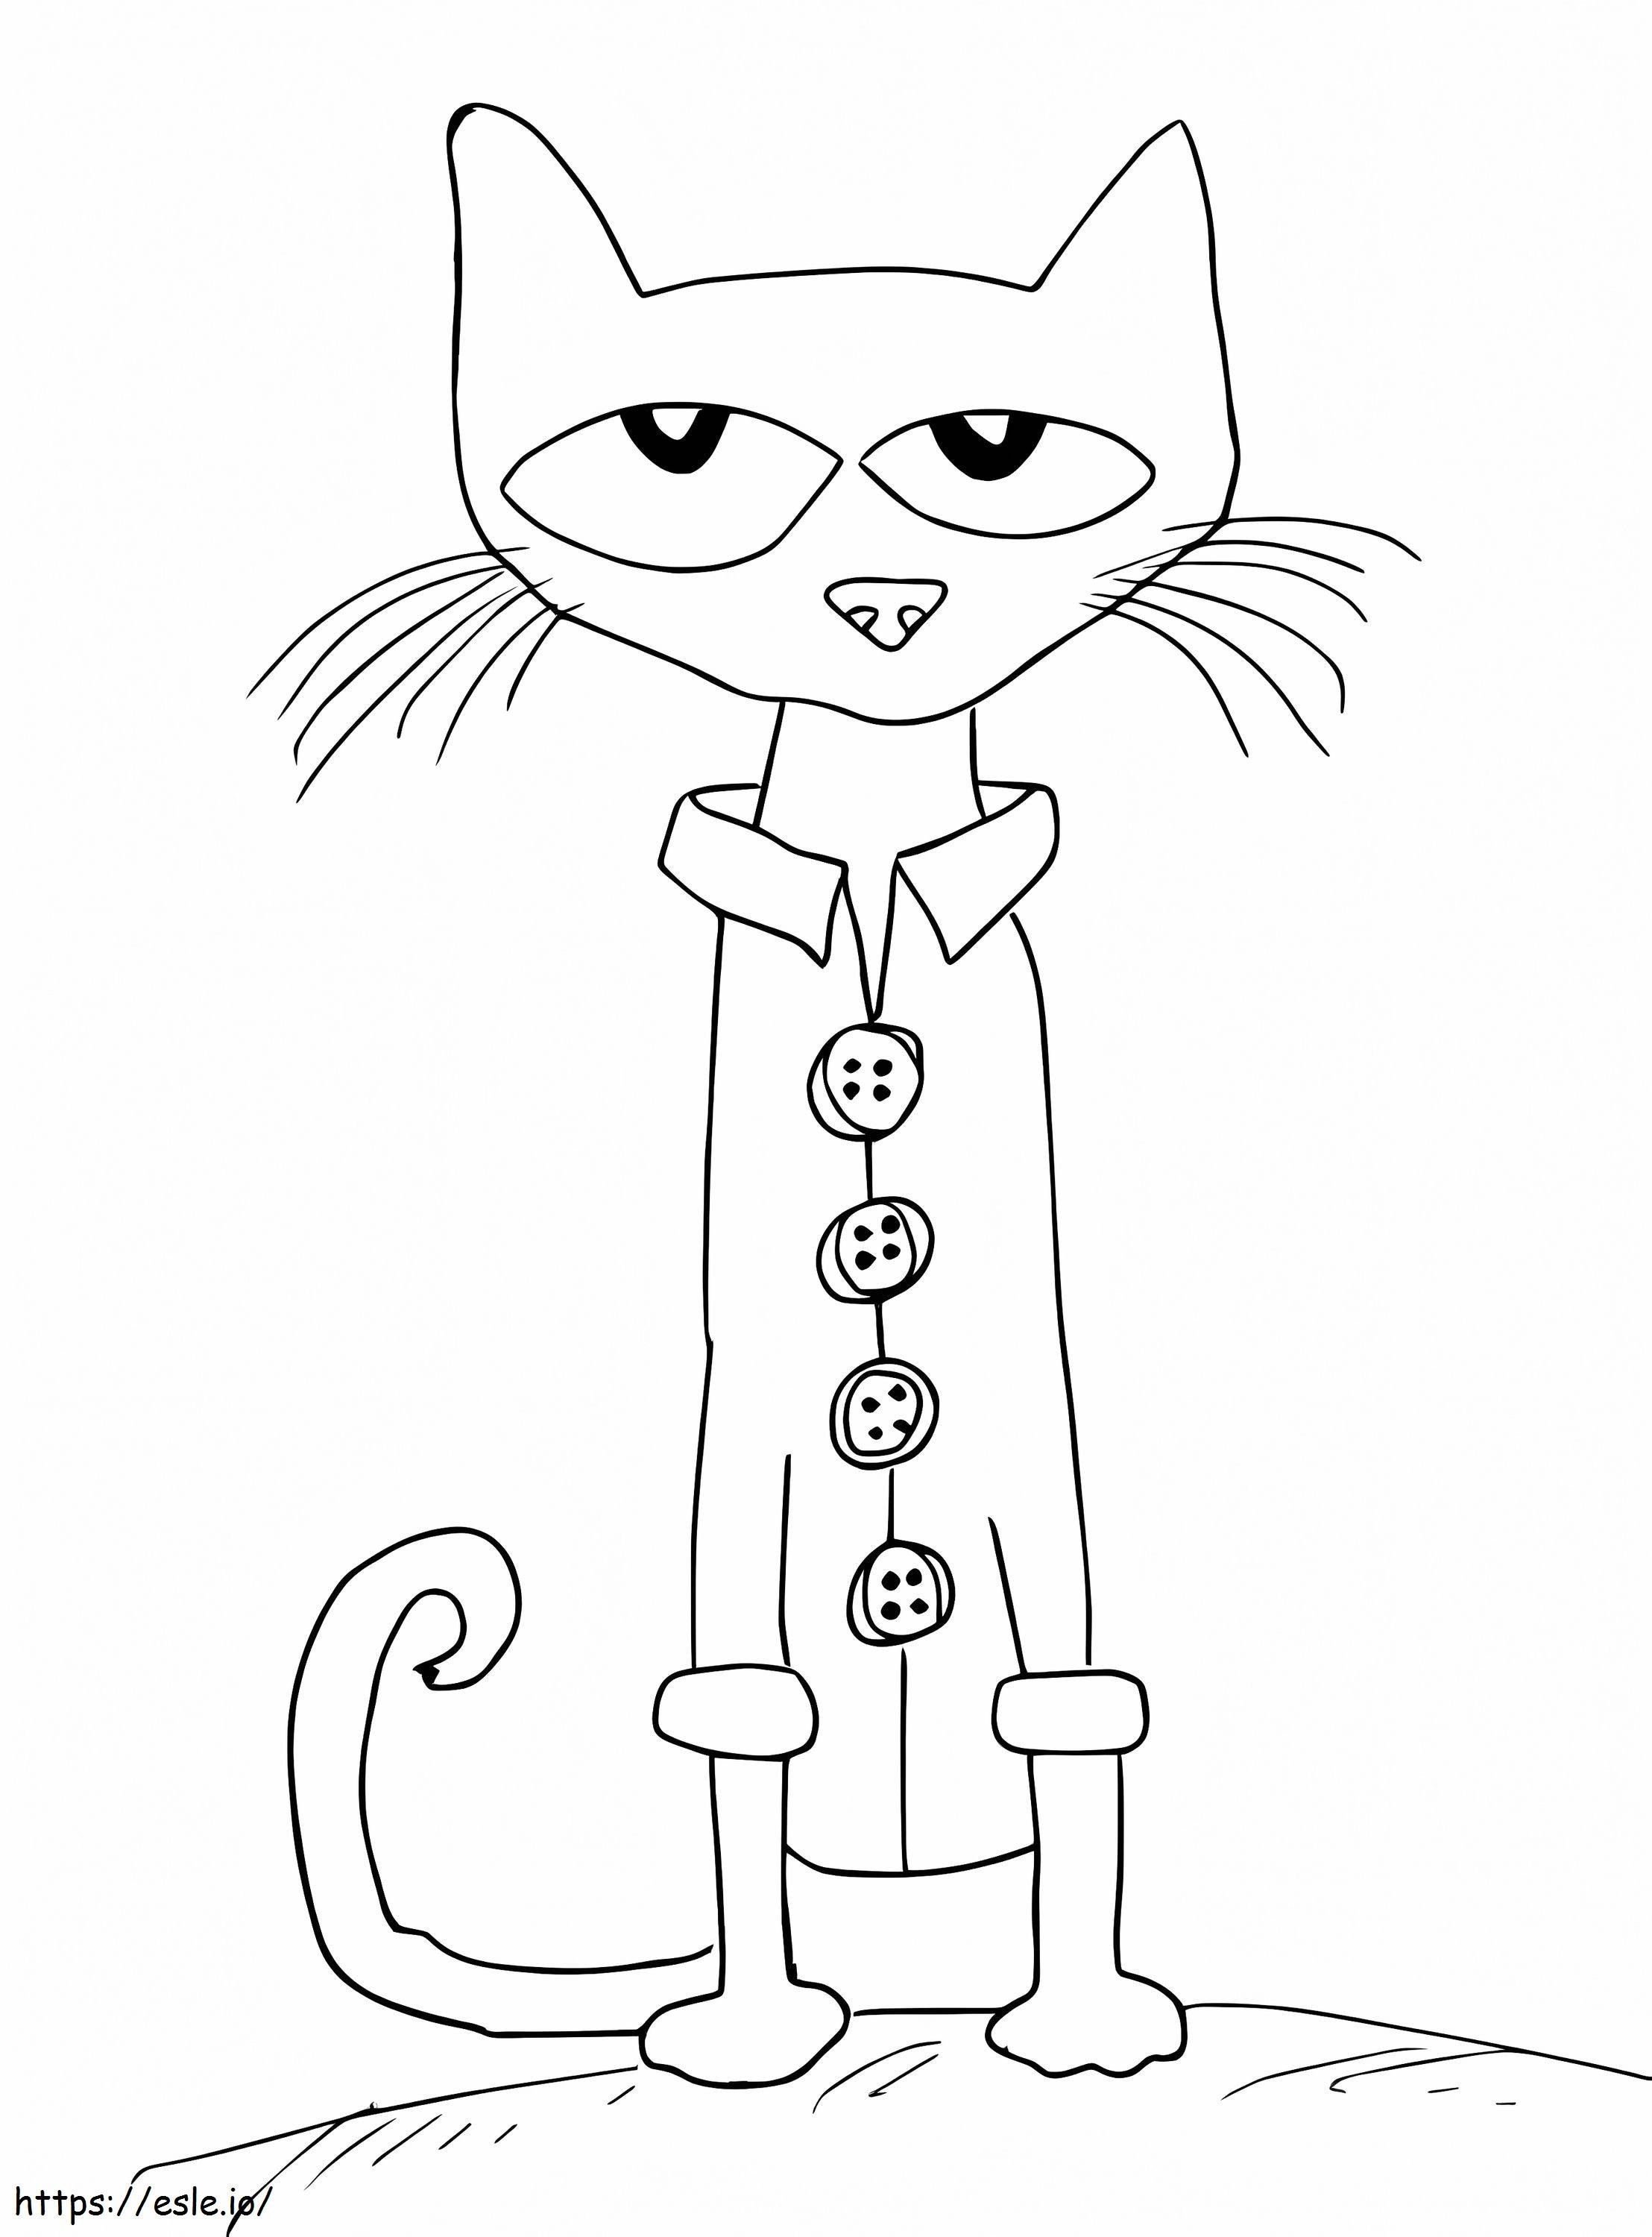 Four Wonderful Buttons Pete The Cat coloring page